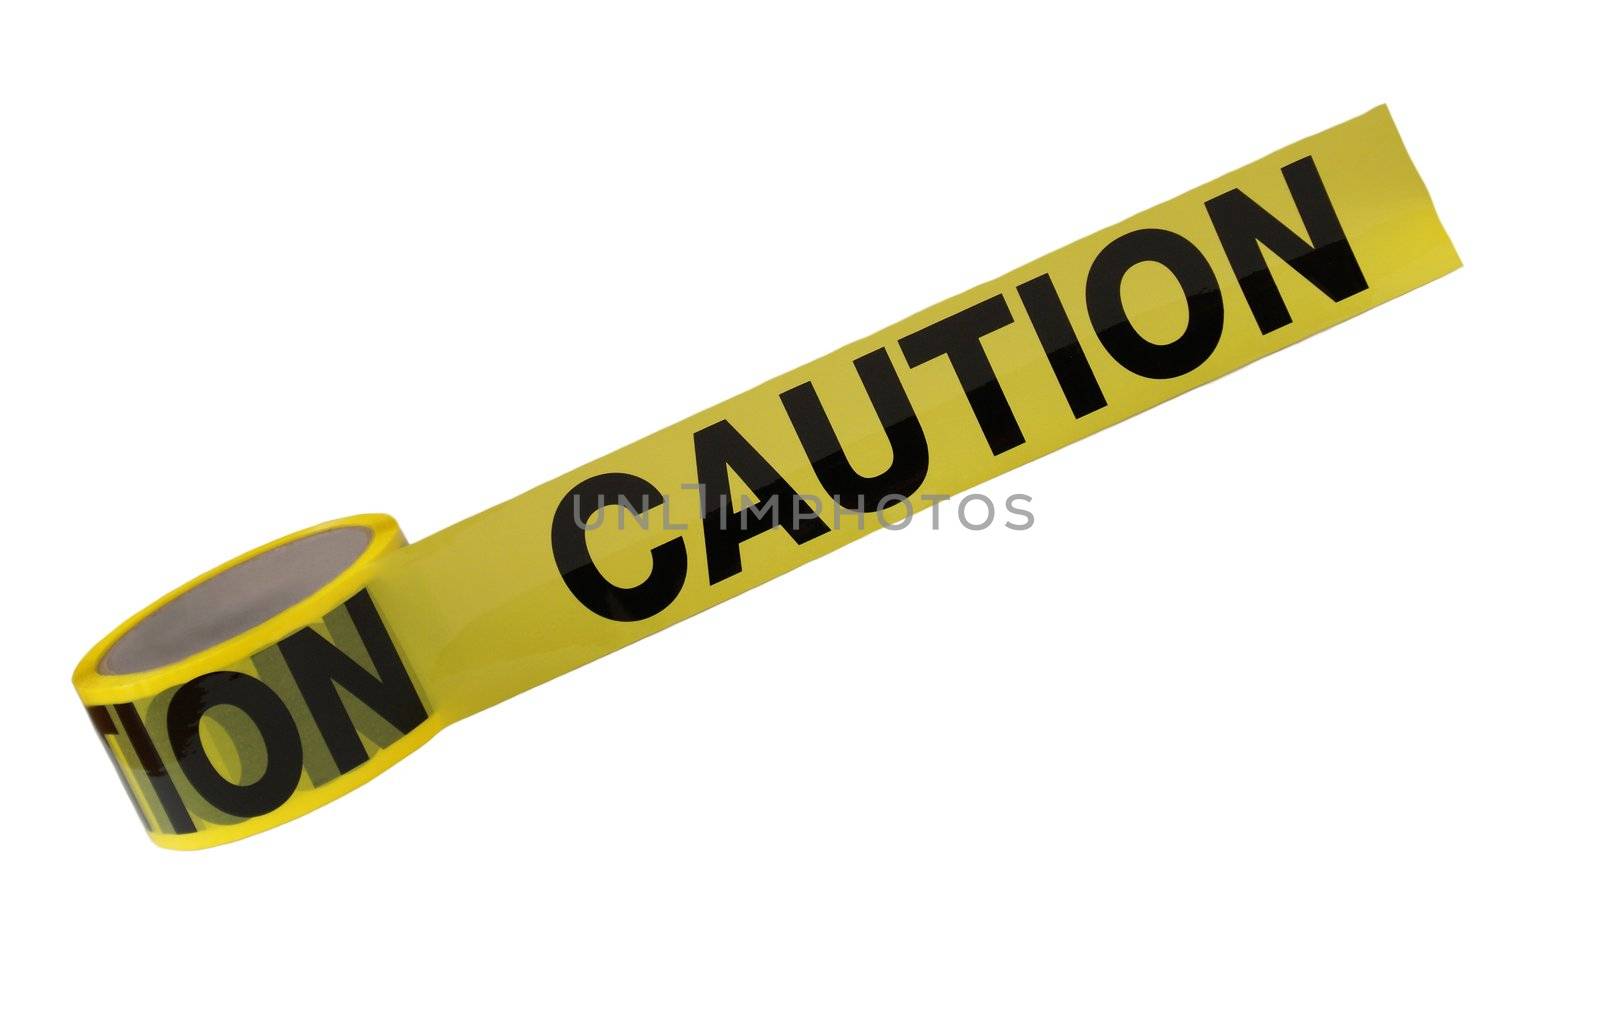 A roll of caution tape is isolated on a white background.